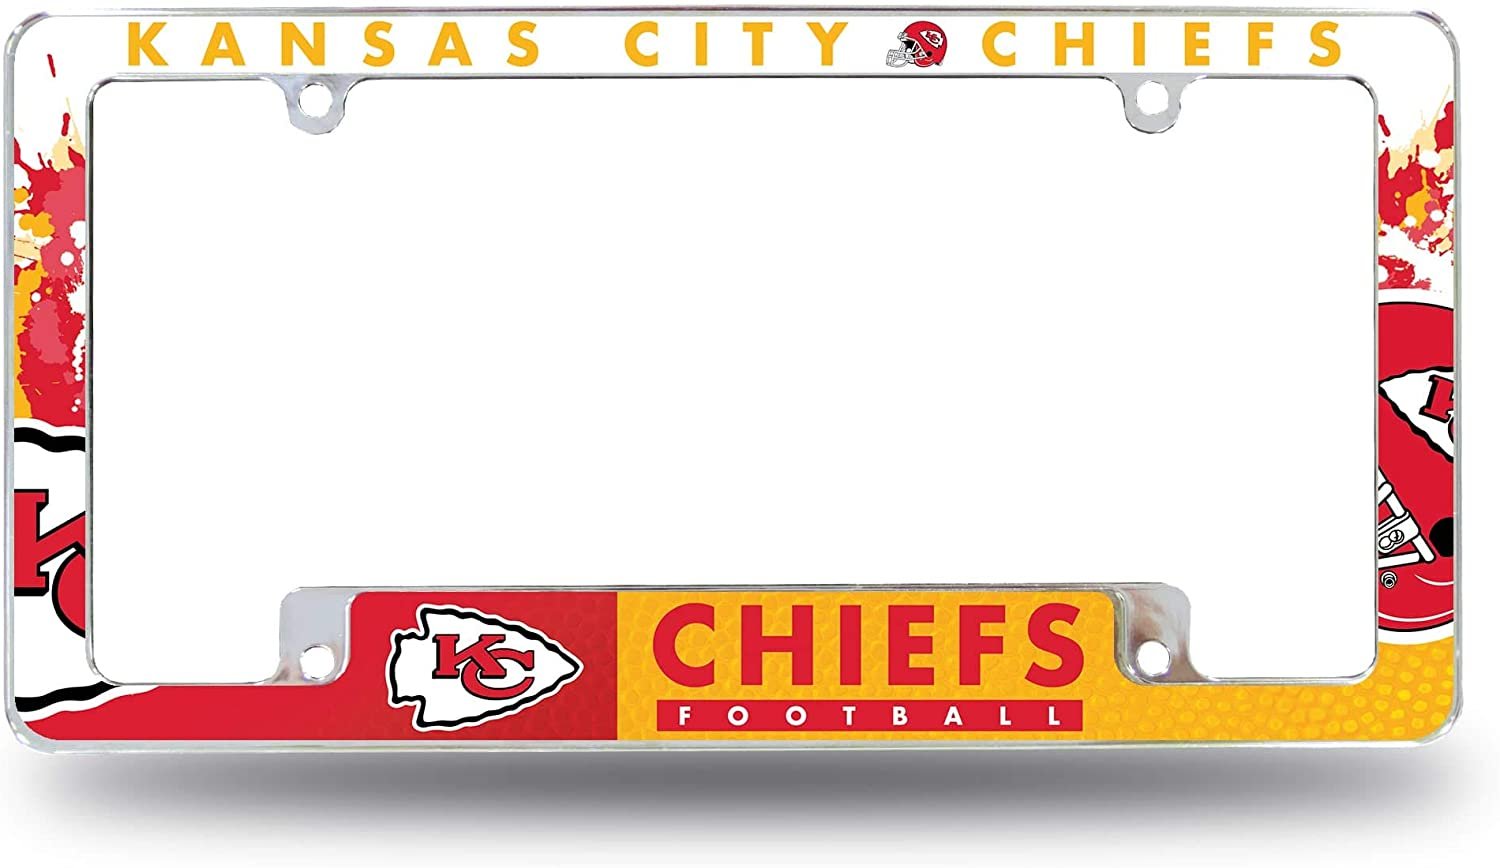 Kansas City Chiefs Metal License License Plate Frame Tag Cover, All Over Design, 12x6 Inch